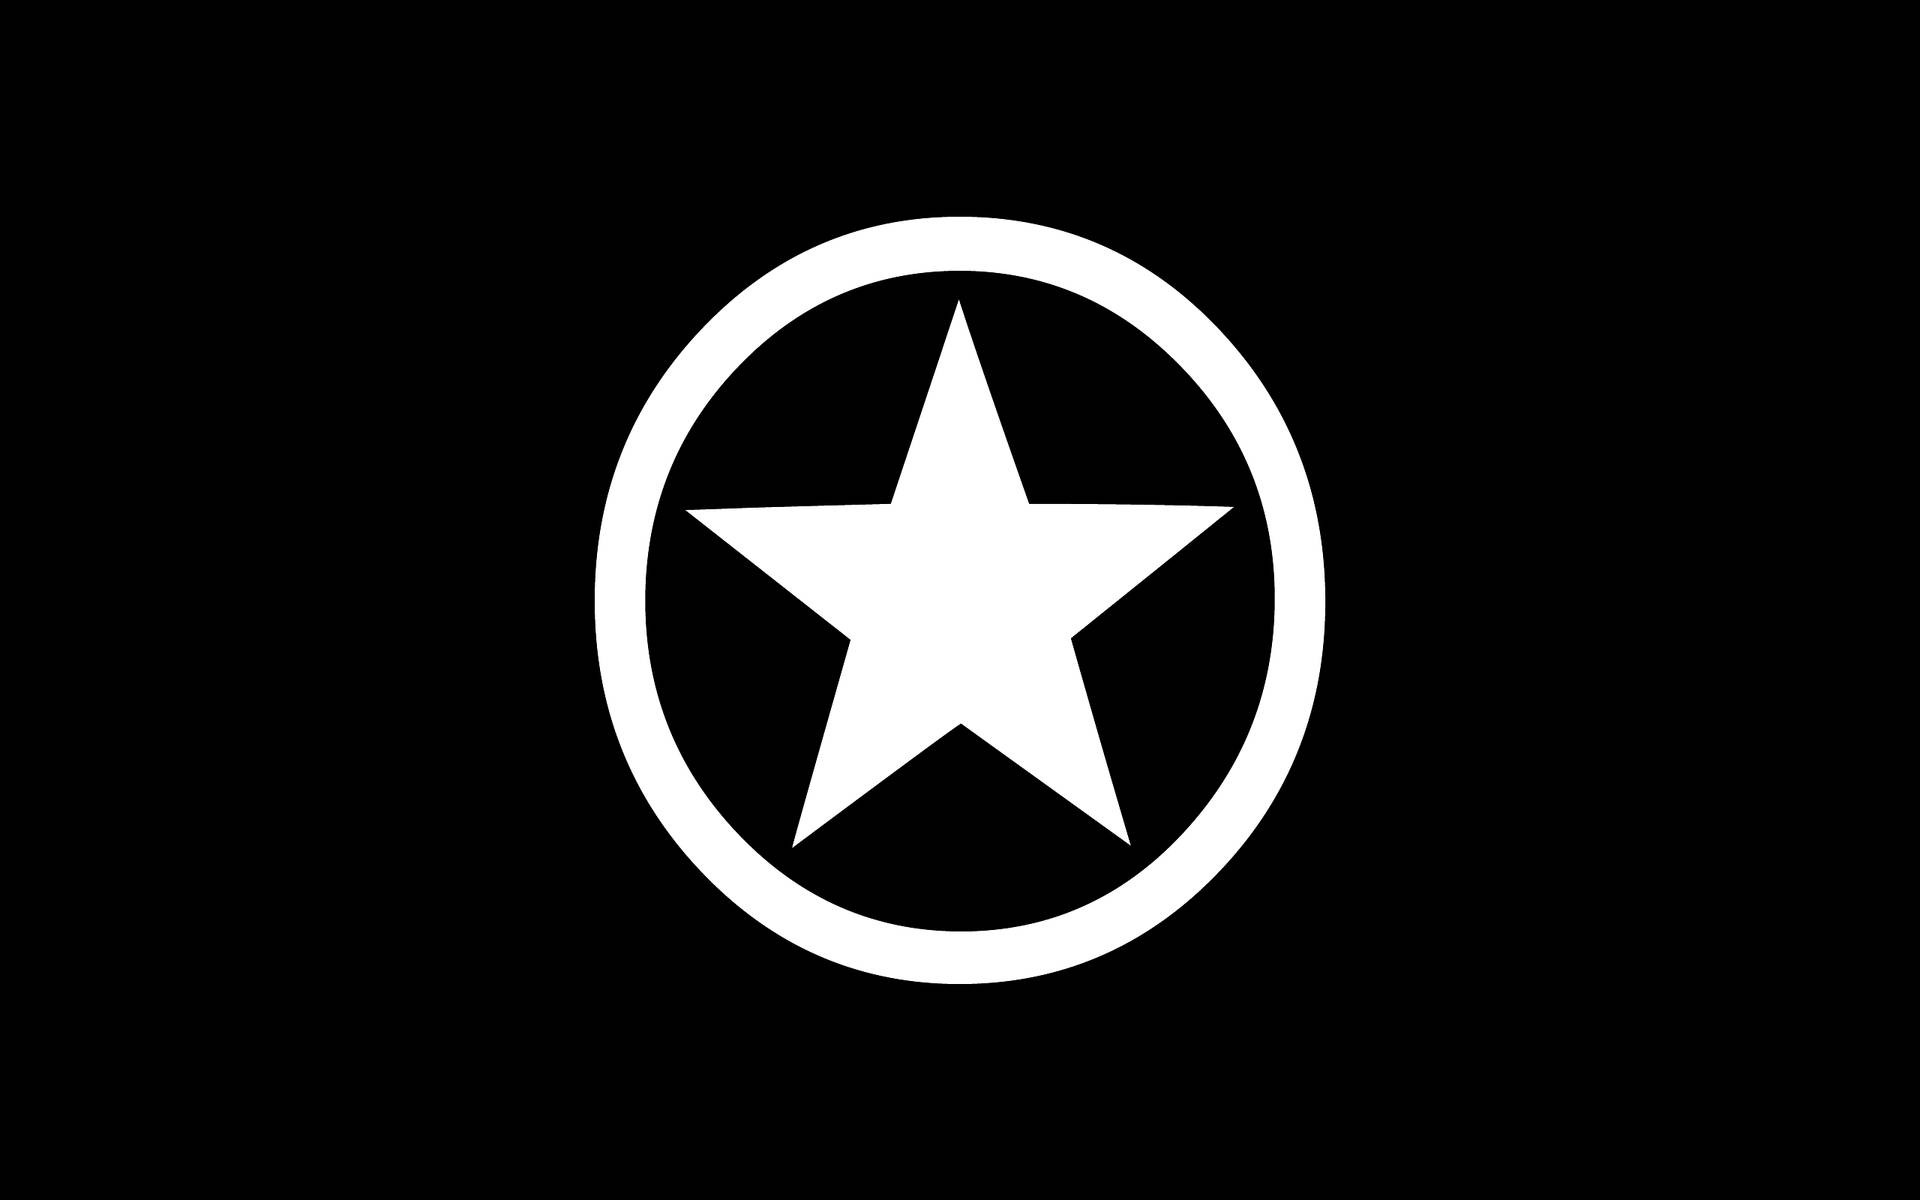 Classic Converse Logo With Iconic Star